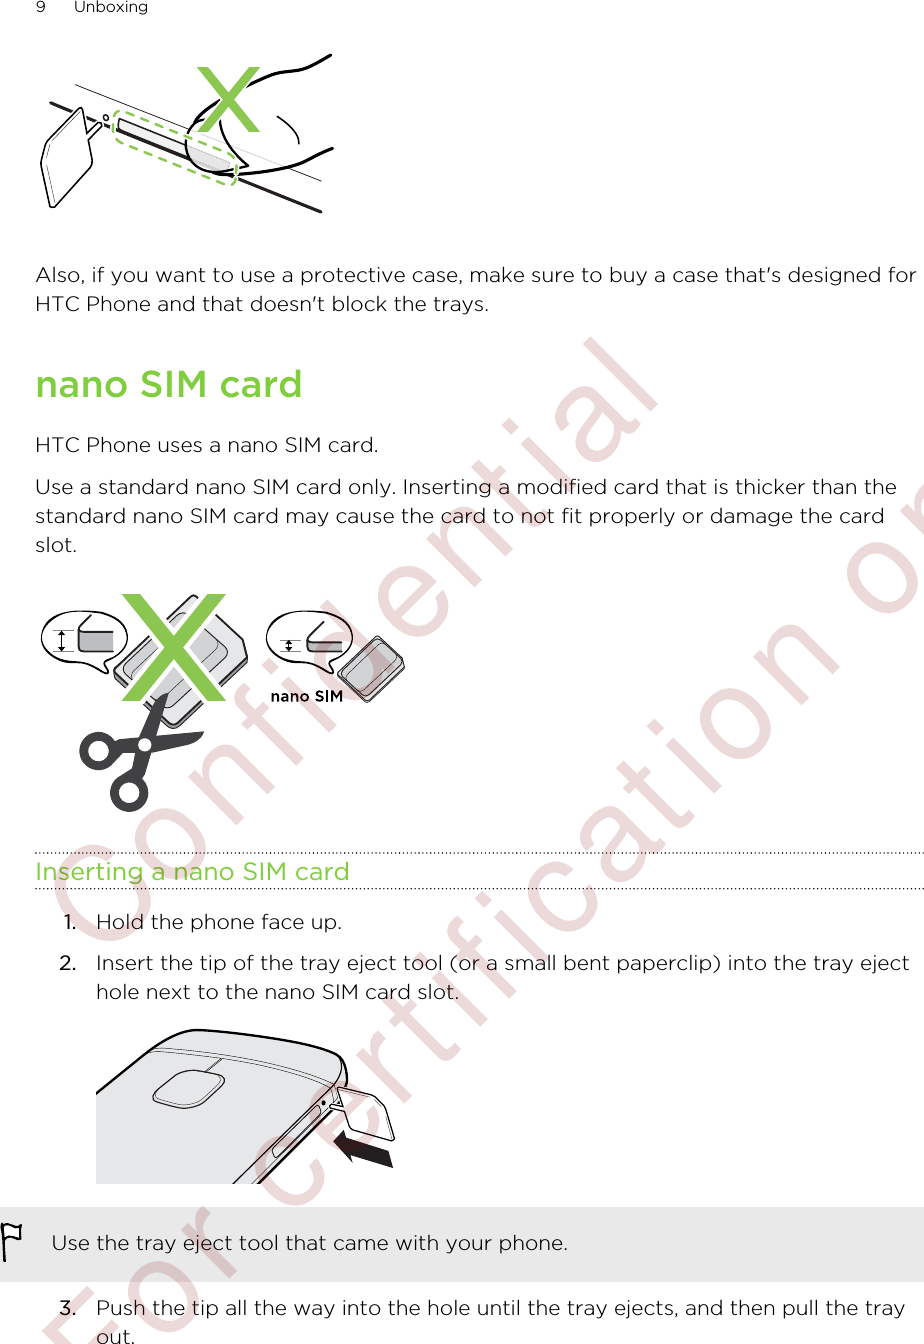 Also, if you want to use a protective case, make sure to buy a case that&apos;s designed forHTC Phone and that doesn&apos;t block the trays.nano SIM cardHTC Phone uses a nano SIM card.Use a standard nano SIM card only. Inserting a modified card that is thicker than thestandard nano SIM card may cause the card to not fit properly or damage the cardslot.Inserting a nano SIM card1. Hold the phone face up.2. Insert the tip of the tray eject tool (or a small bent paperclip) into the tray ejecthole next to the nano SIM card slot. Use the tray eject tool that came with your phone.3. Push the tip all the way into the hole until the tray ejects, and then pull the trayout.9 Unboxing        Confidential  For certification only